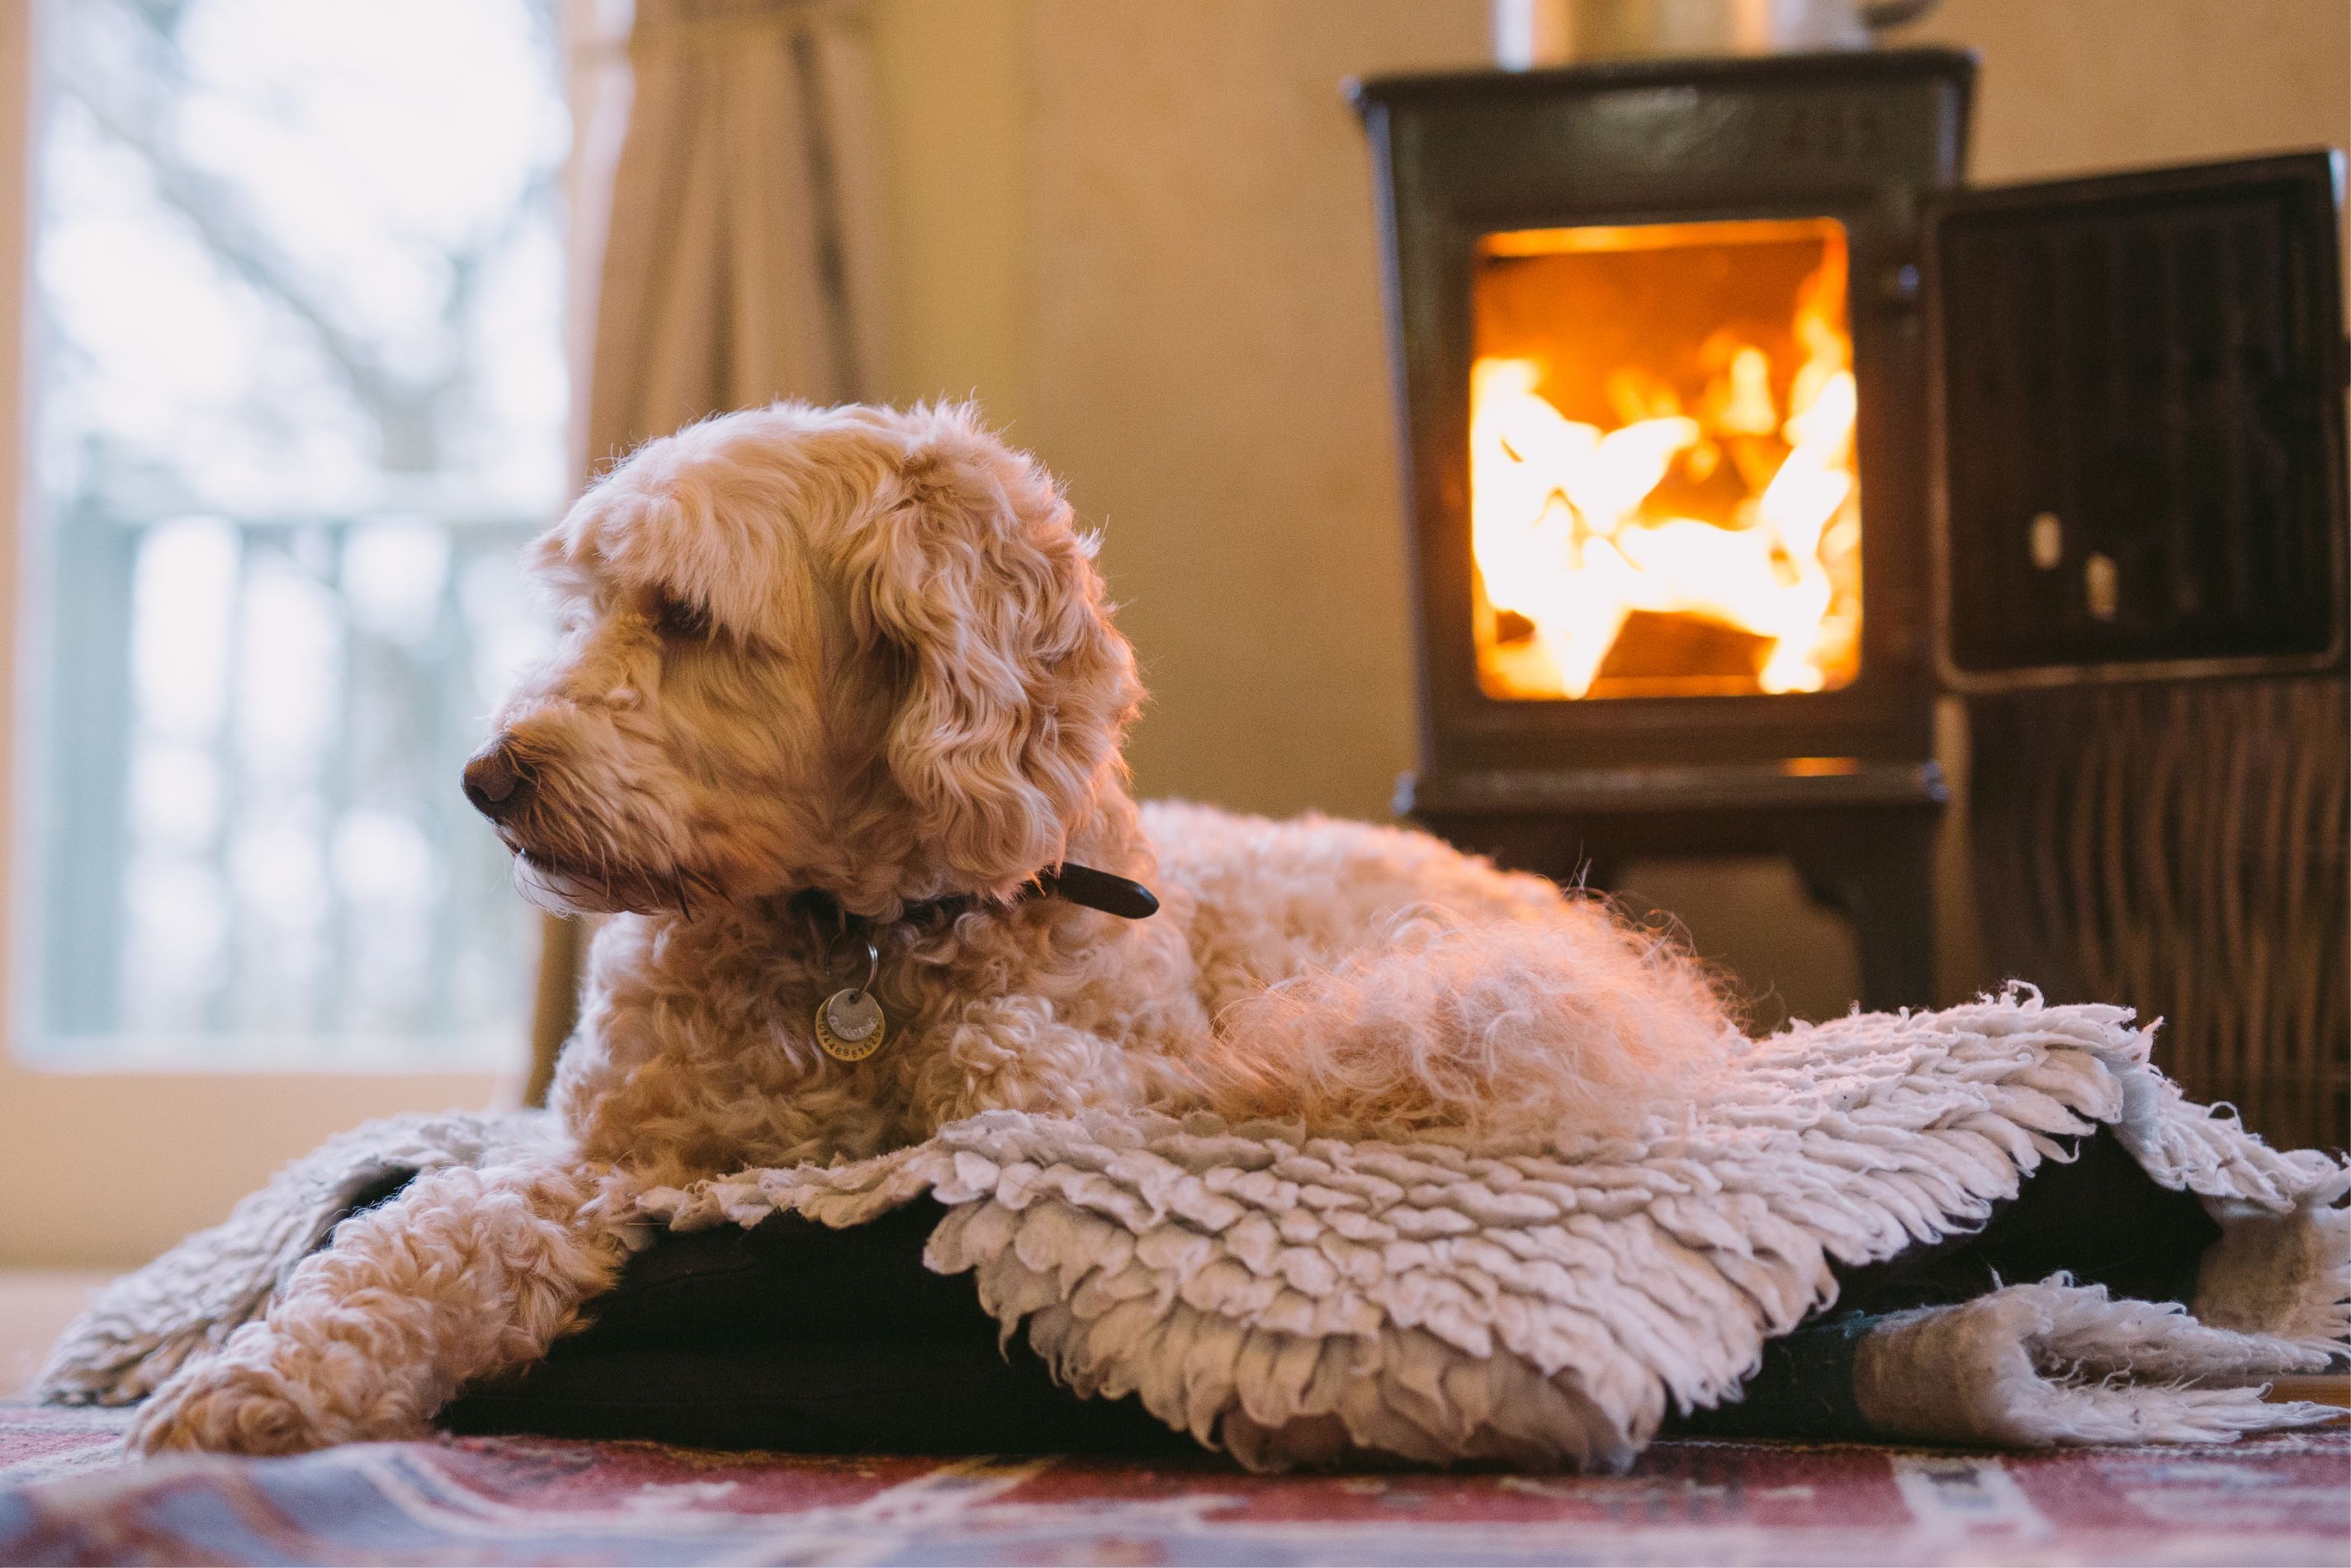 A dog sitting in front of a fire